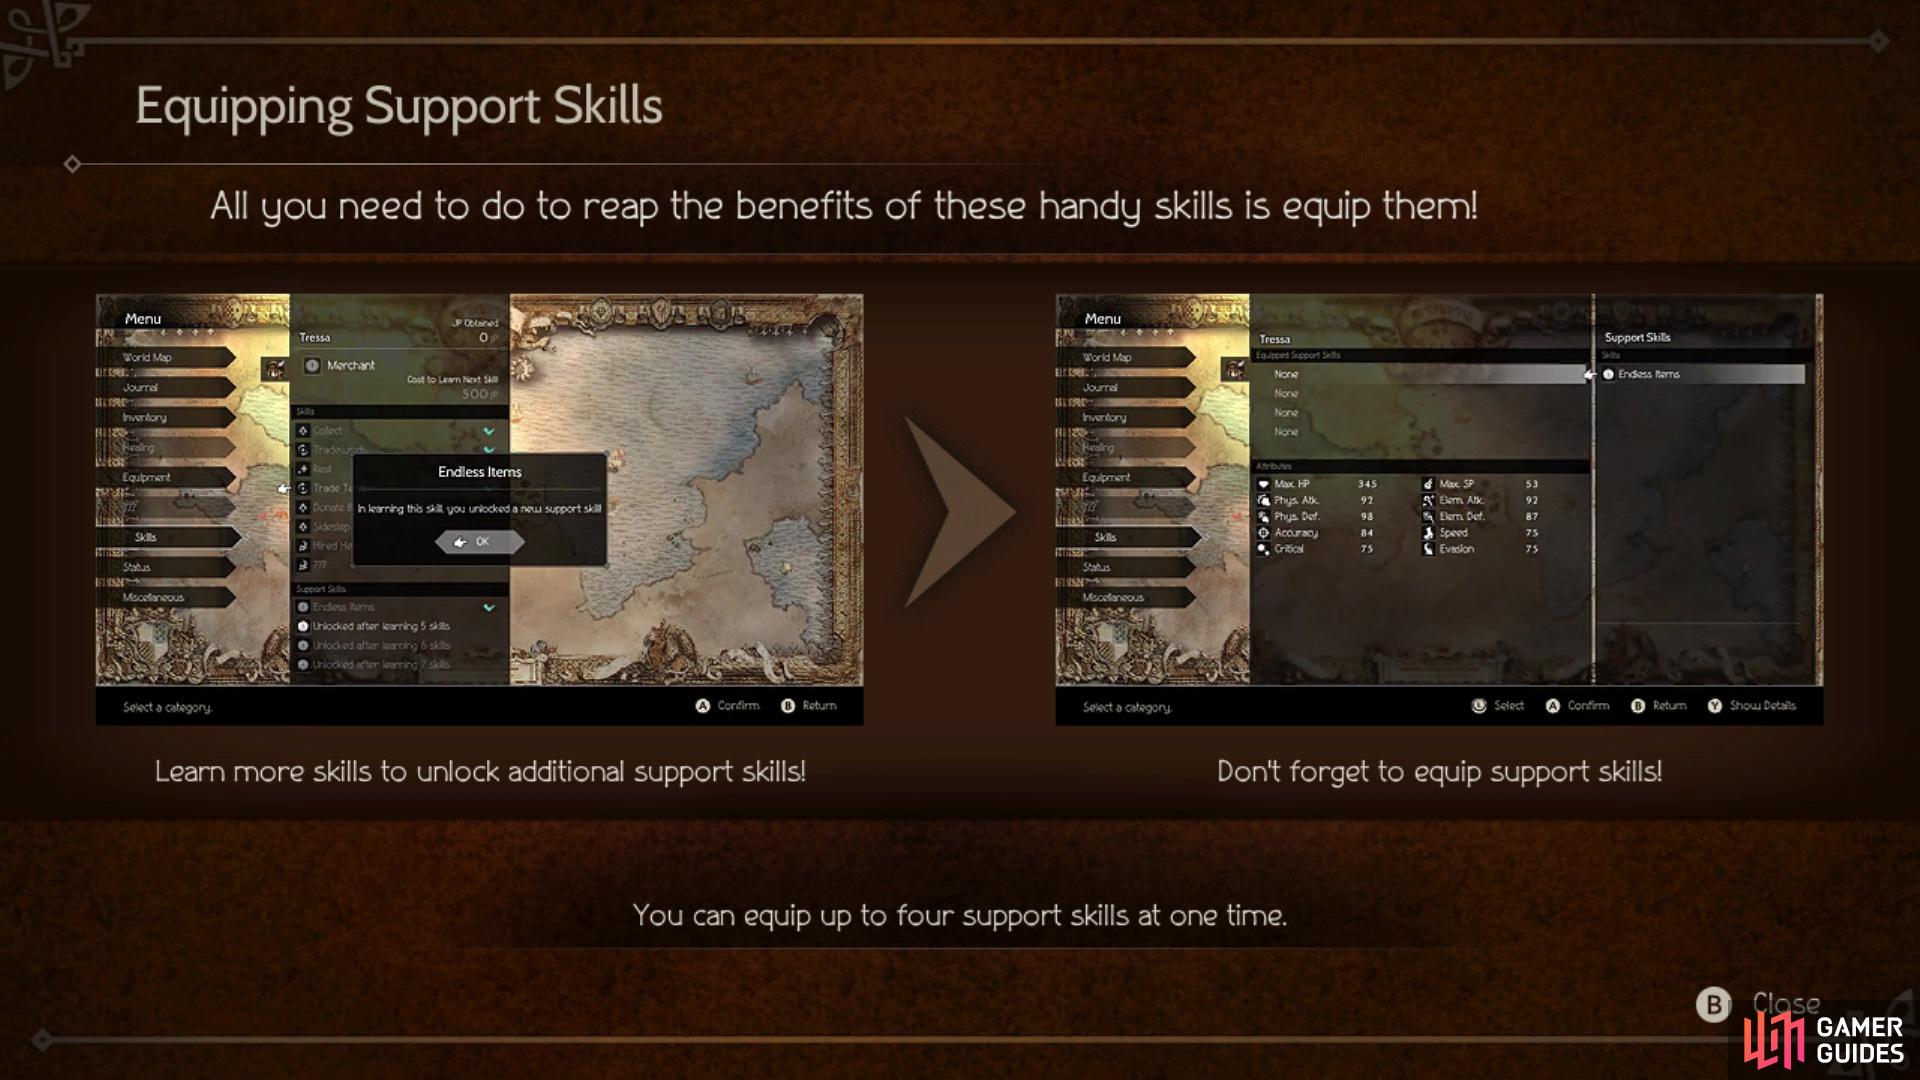 Don't forget to equip support skills once you've learned them